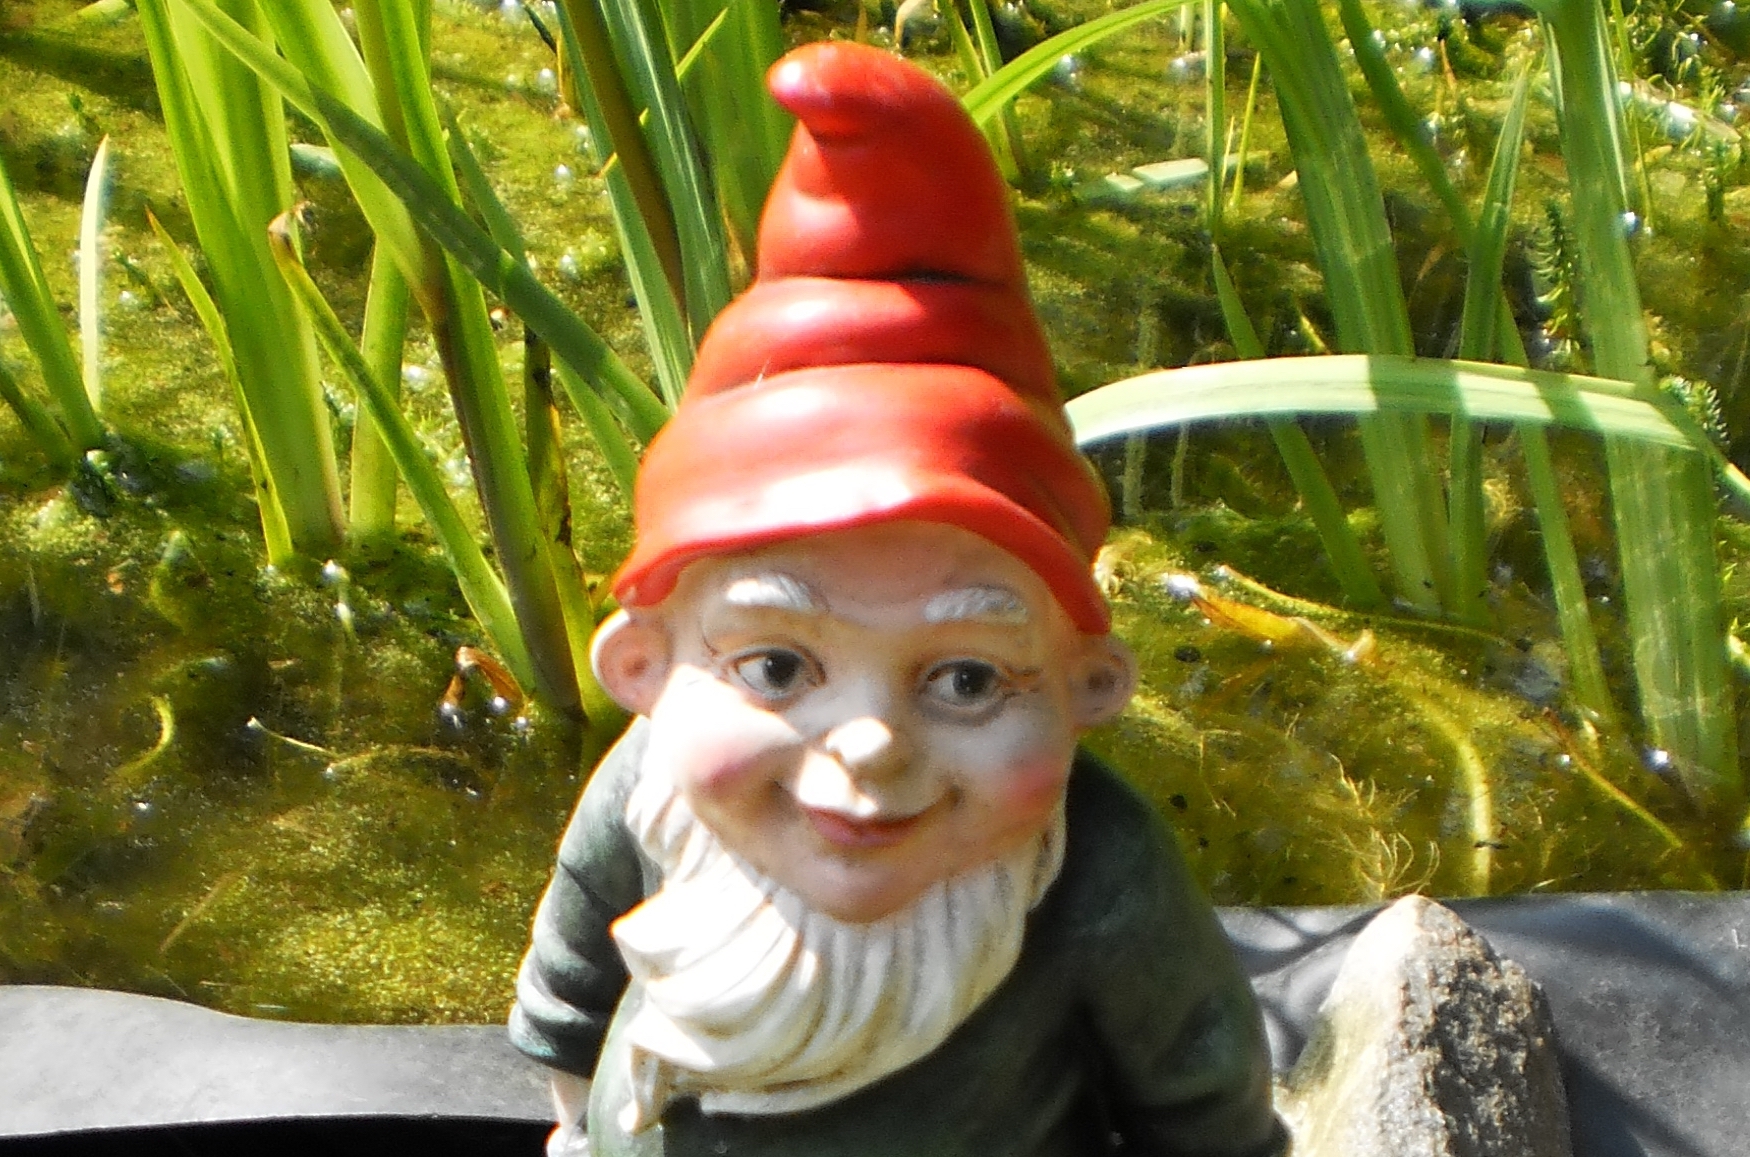 Gnome or gnomes by Martin1009 via WikiCommons